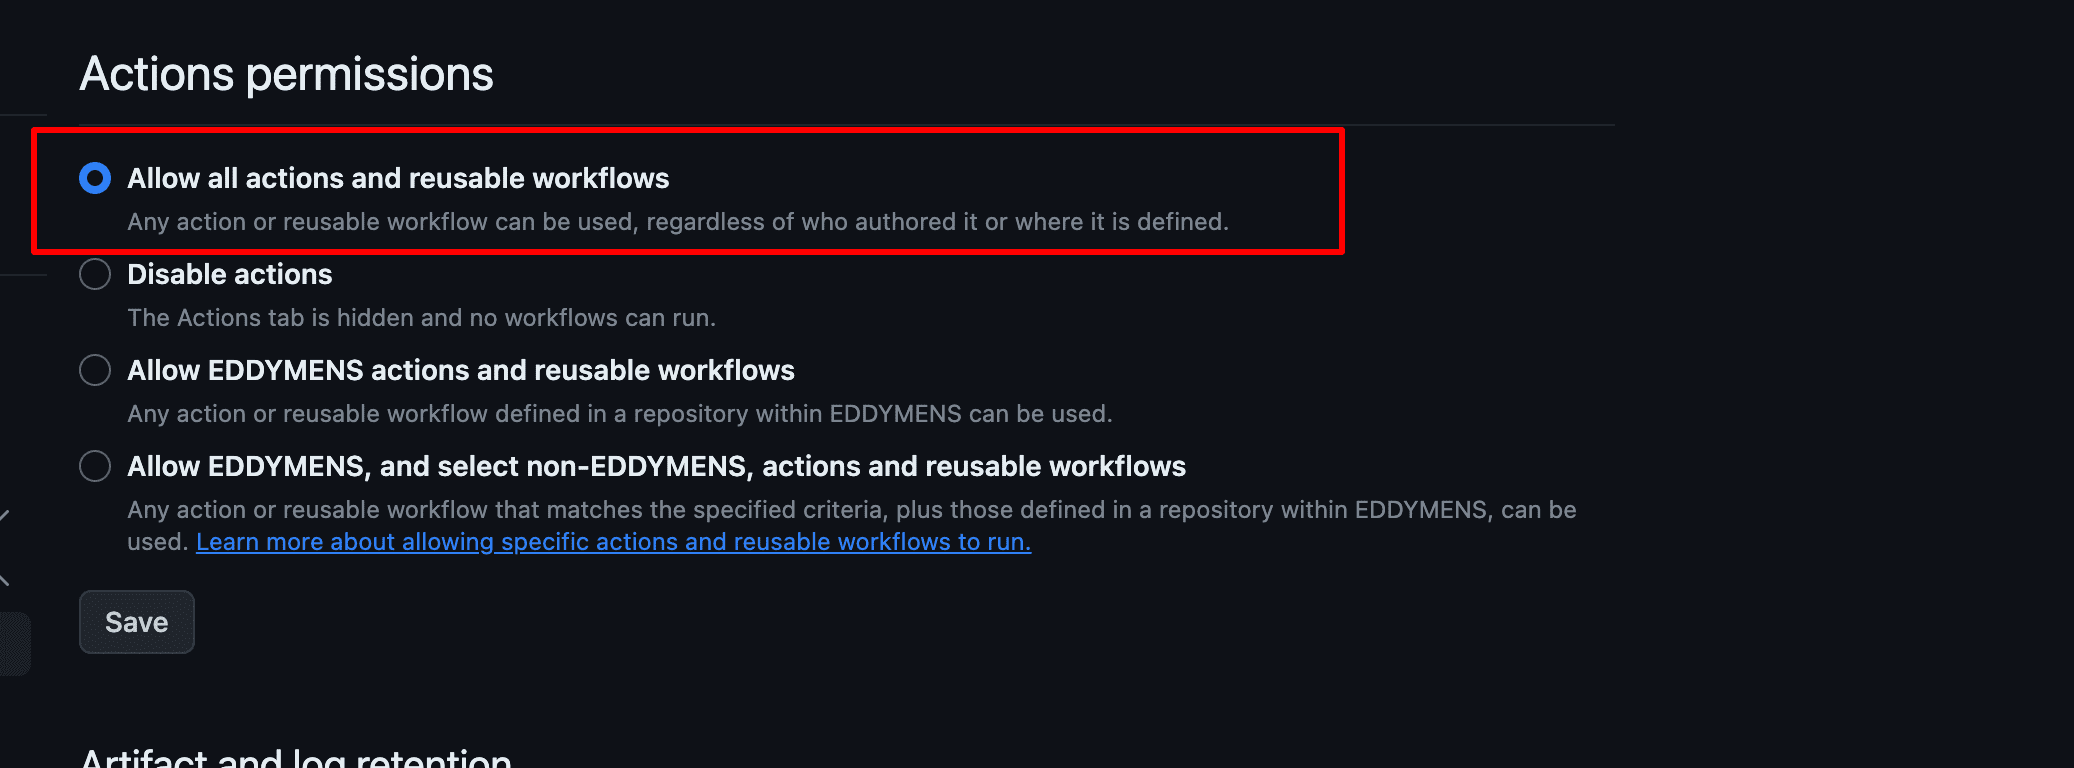 GitHub Action permissions [→]